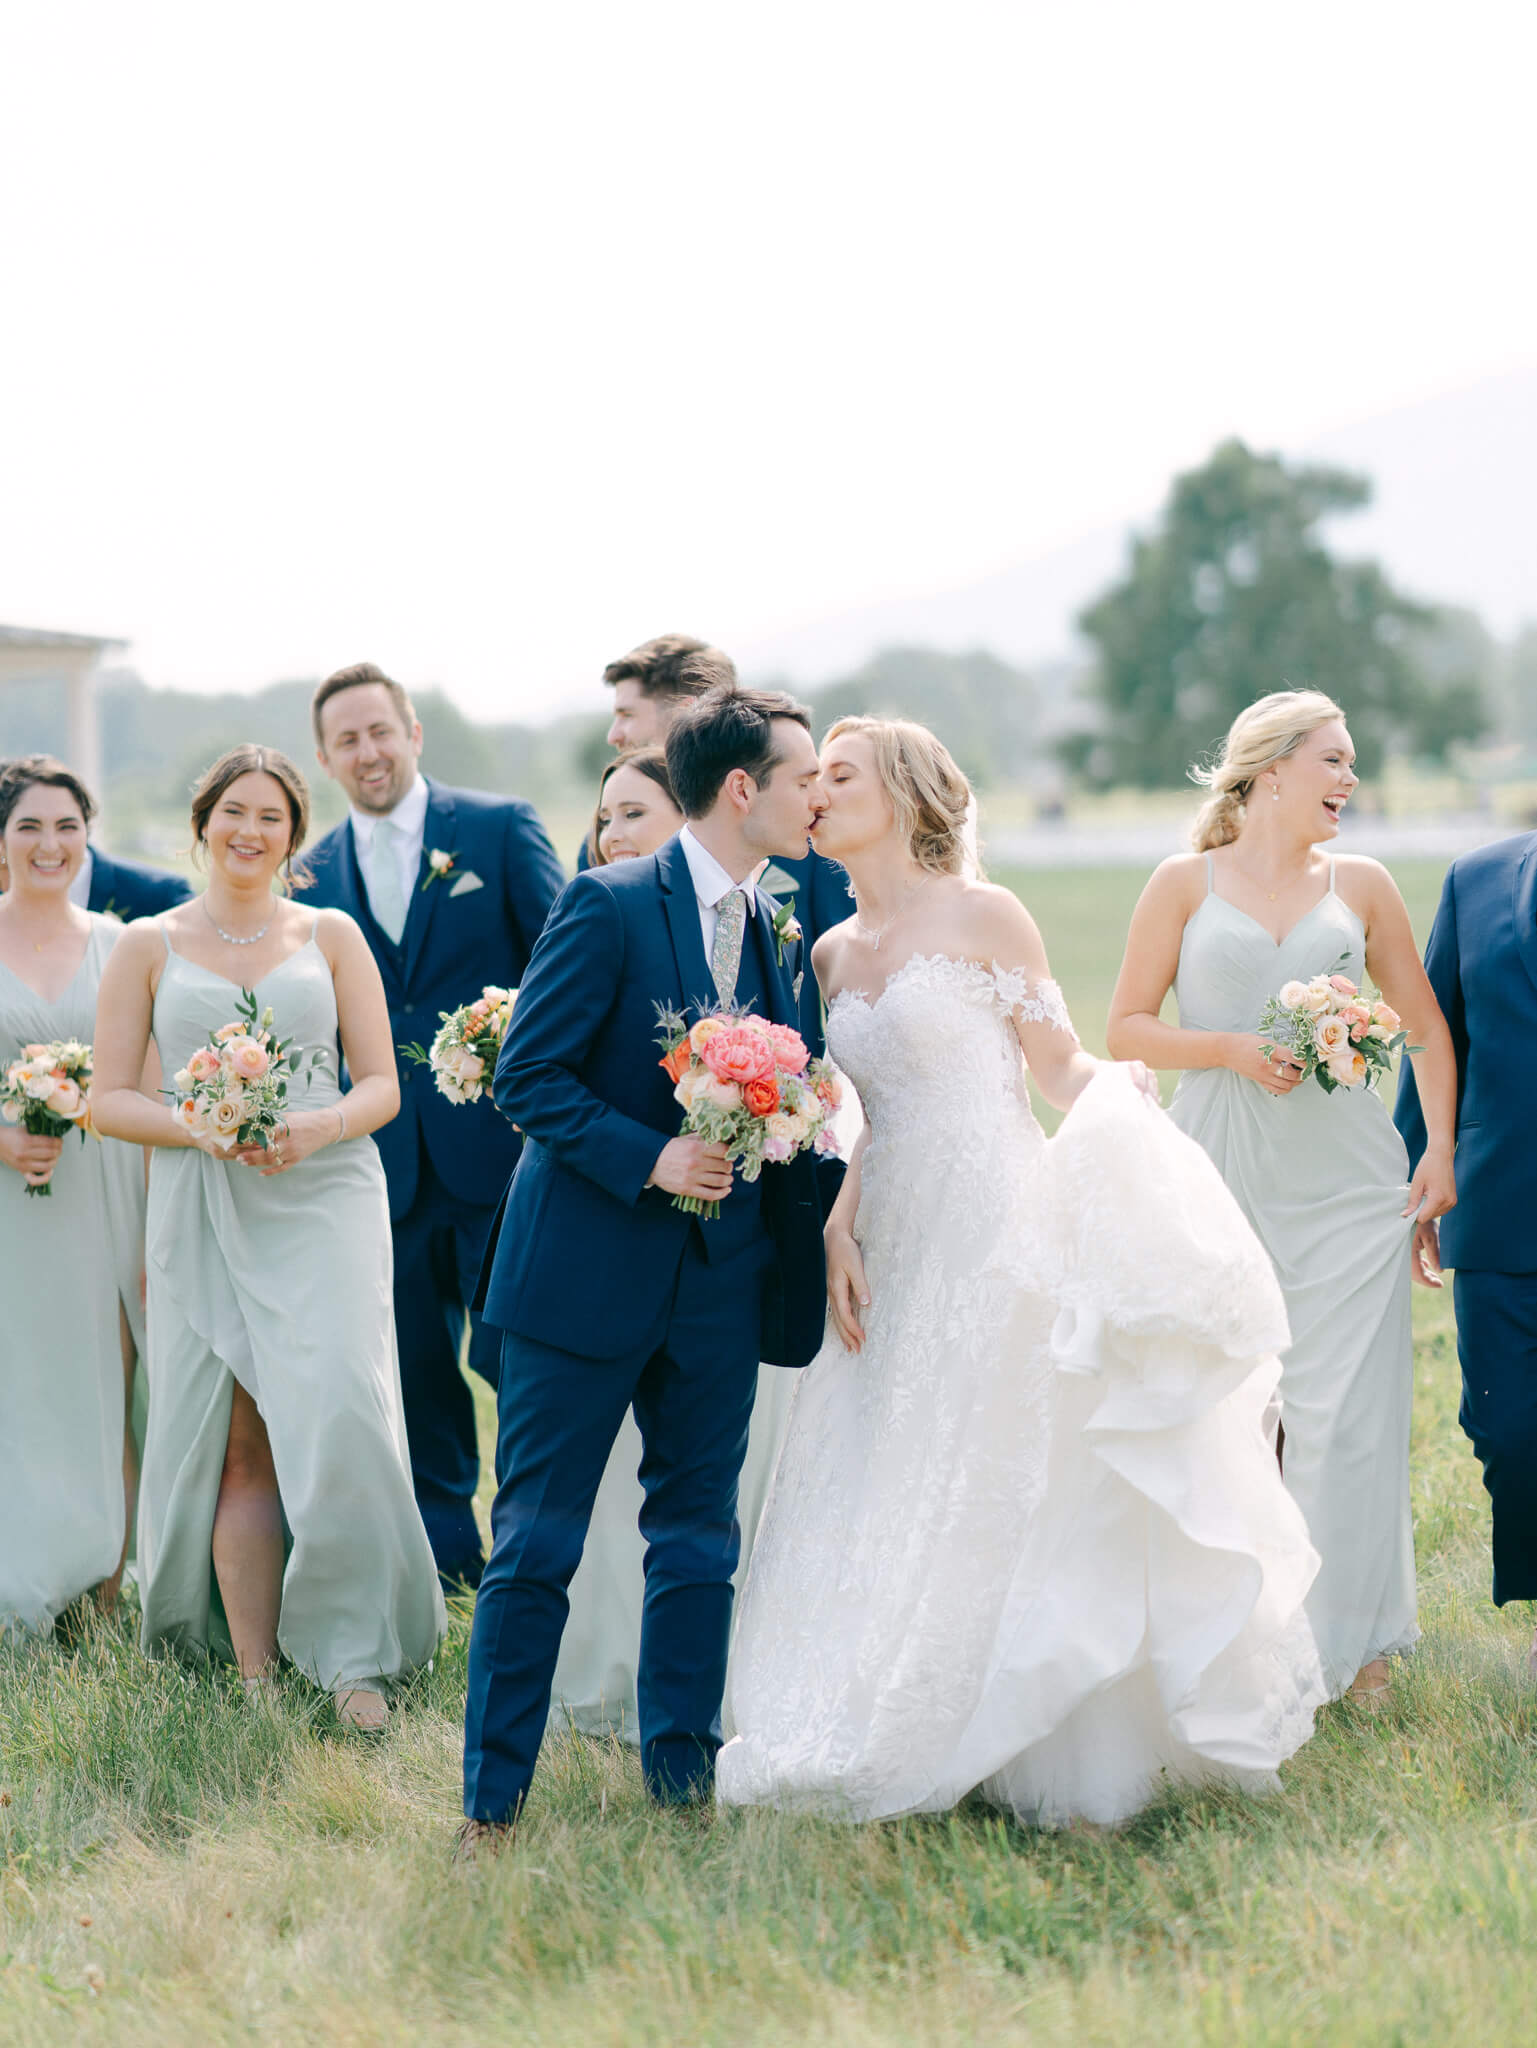 A groom and bride kissing while walking with their wedding party.